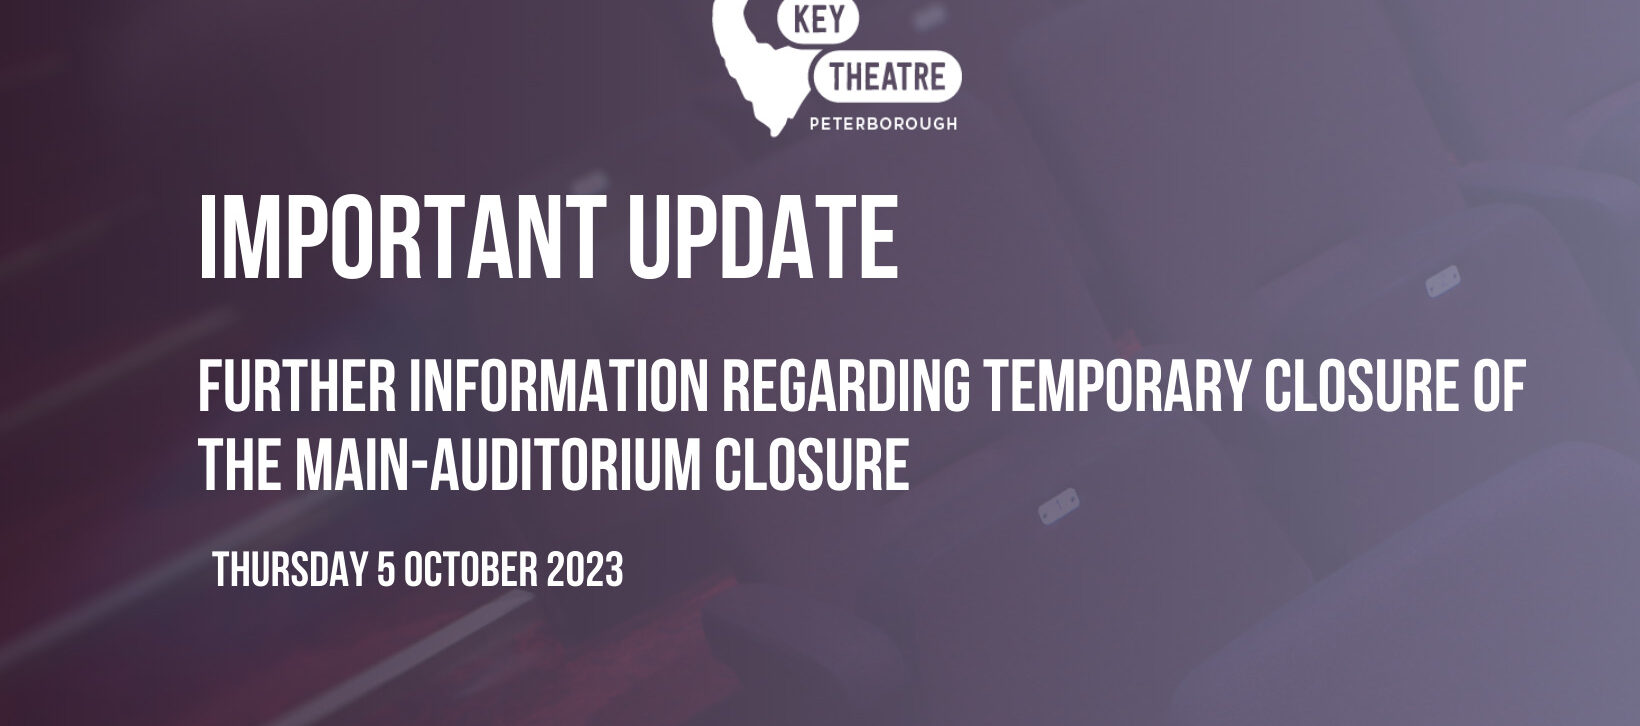 Updated Information for Bookers following Temporary Closure of Key Theatre Main Auditorium